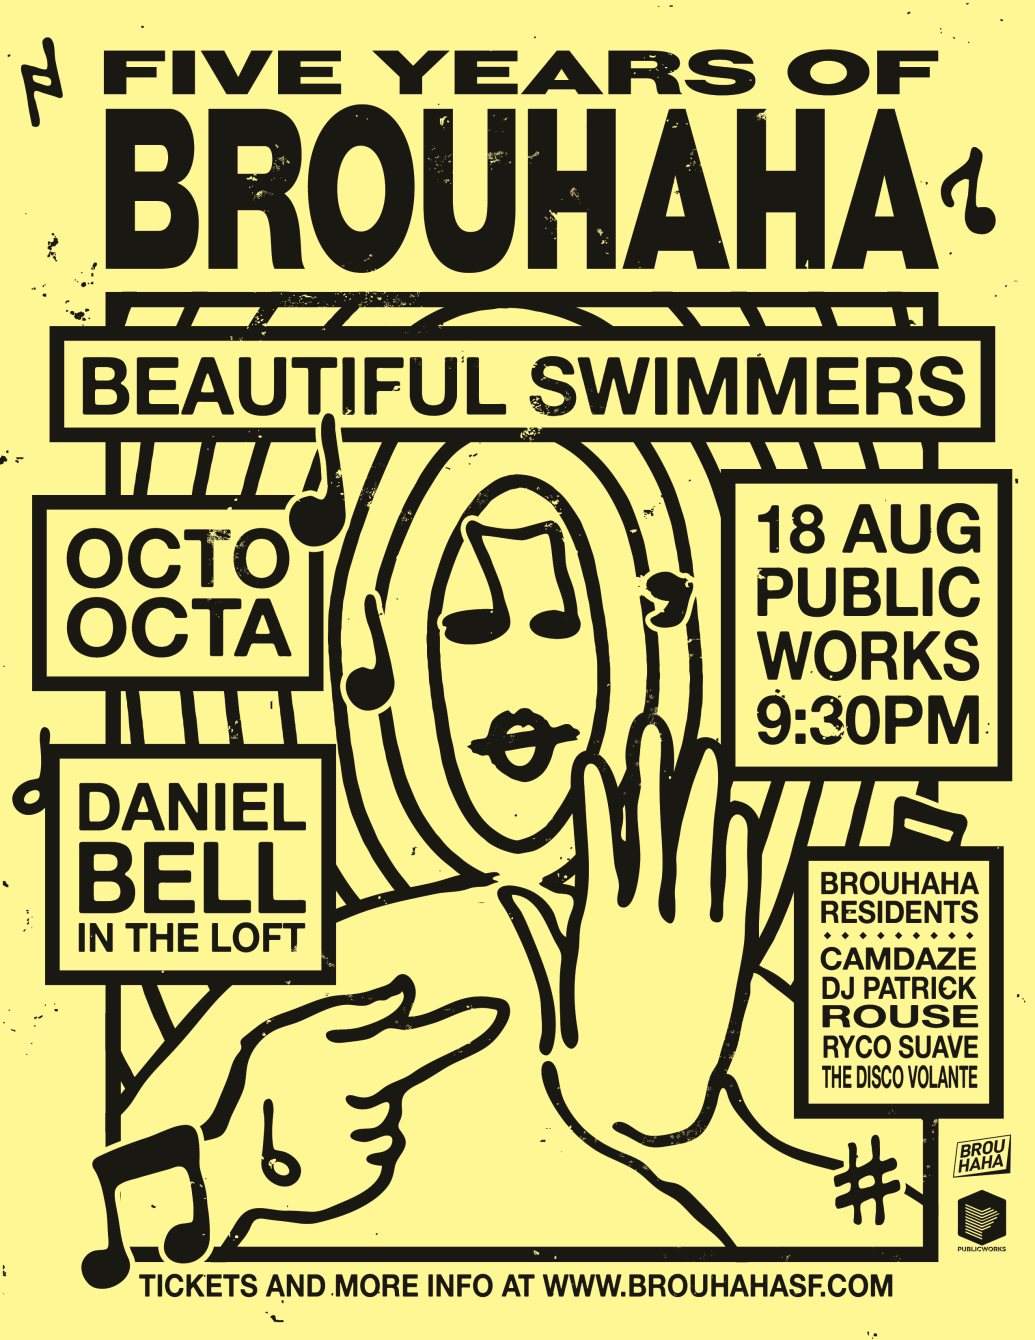 Brouhaha 5-Year: Octo Octa, Beautiful Swimmers, Daniel Bell - フライヤー表